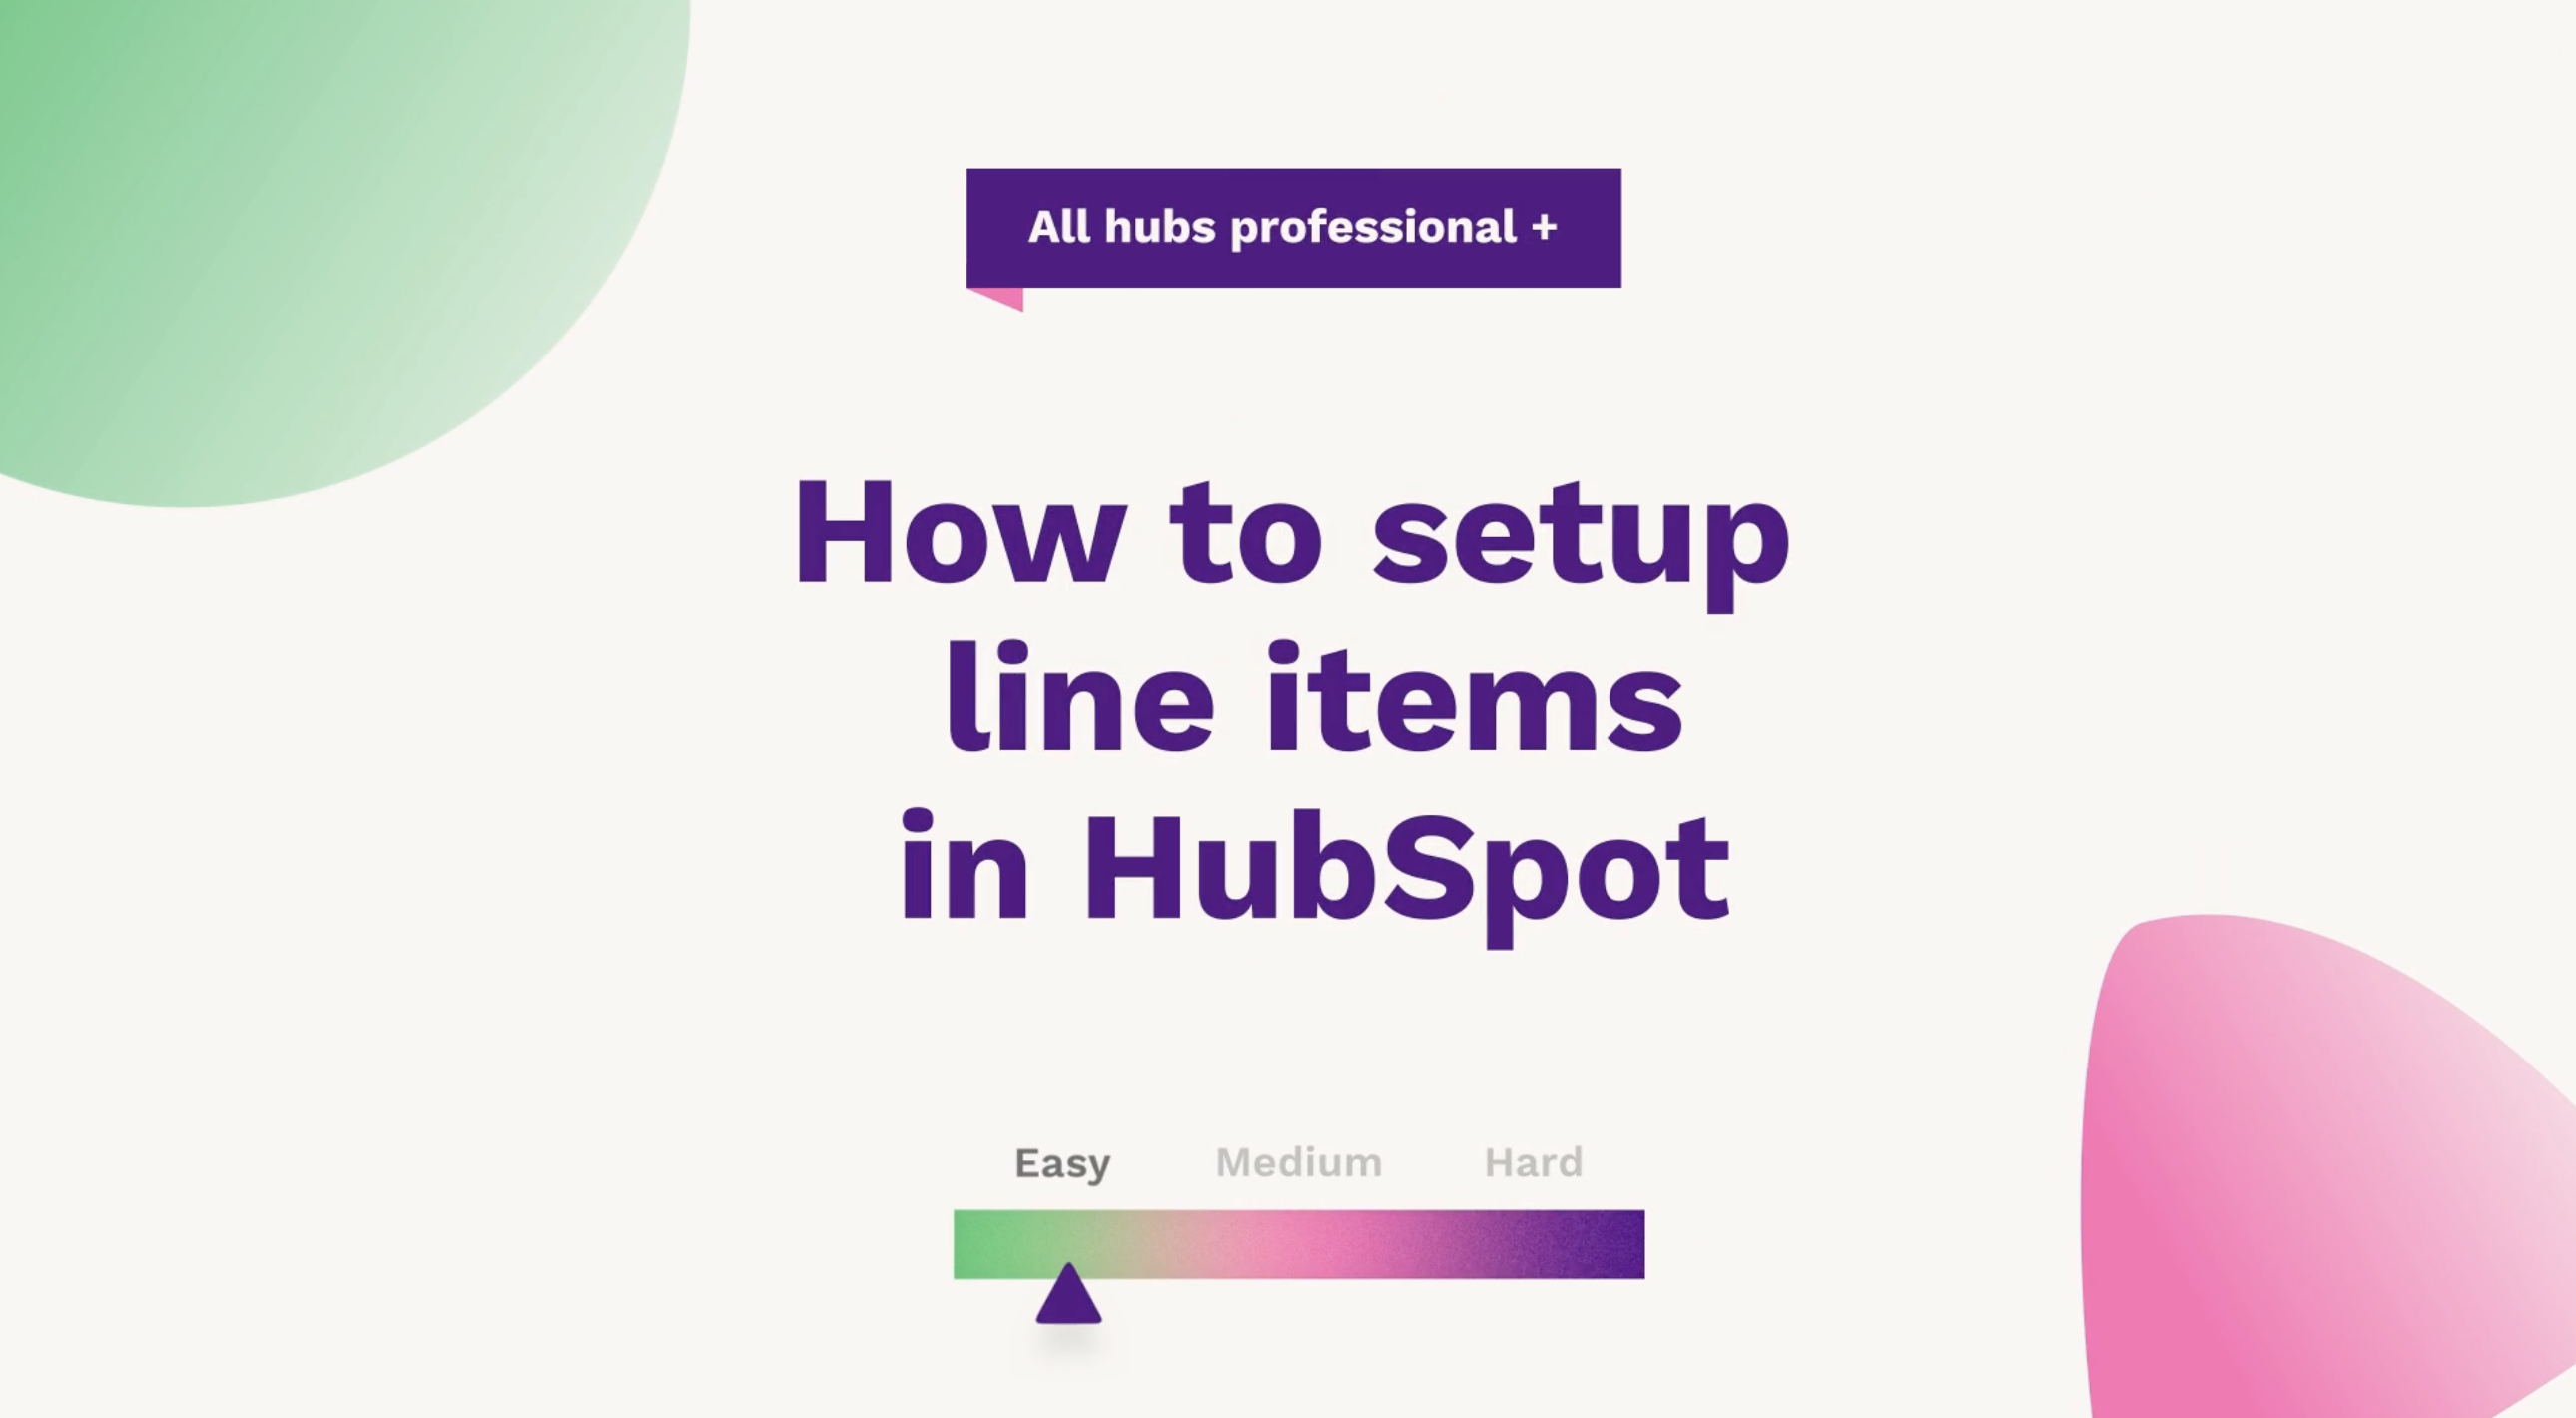 How to setup line items in HubSpot